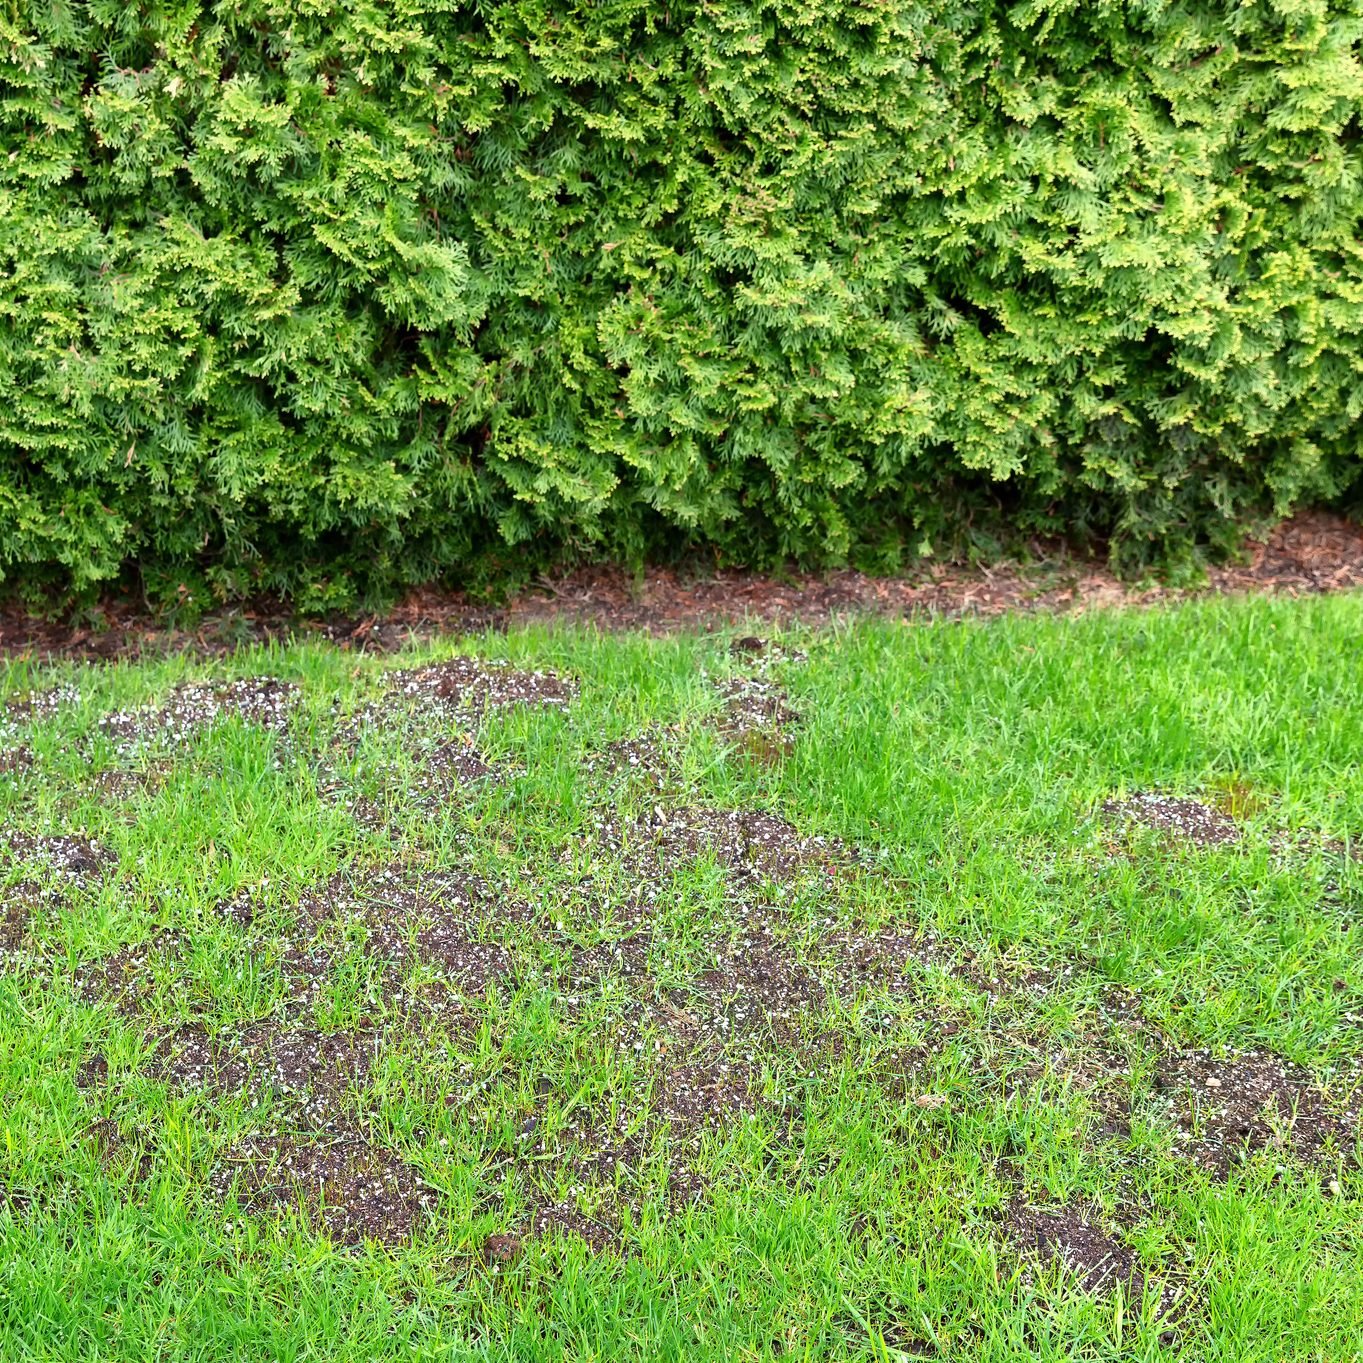  Will Grass Spread and Cover the Bare Spots in My Lawn?